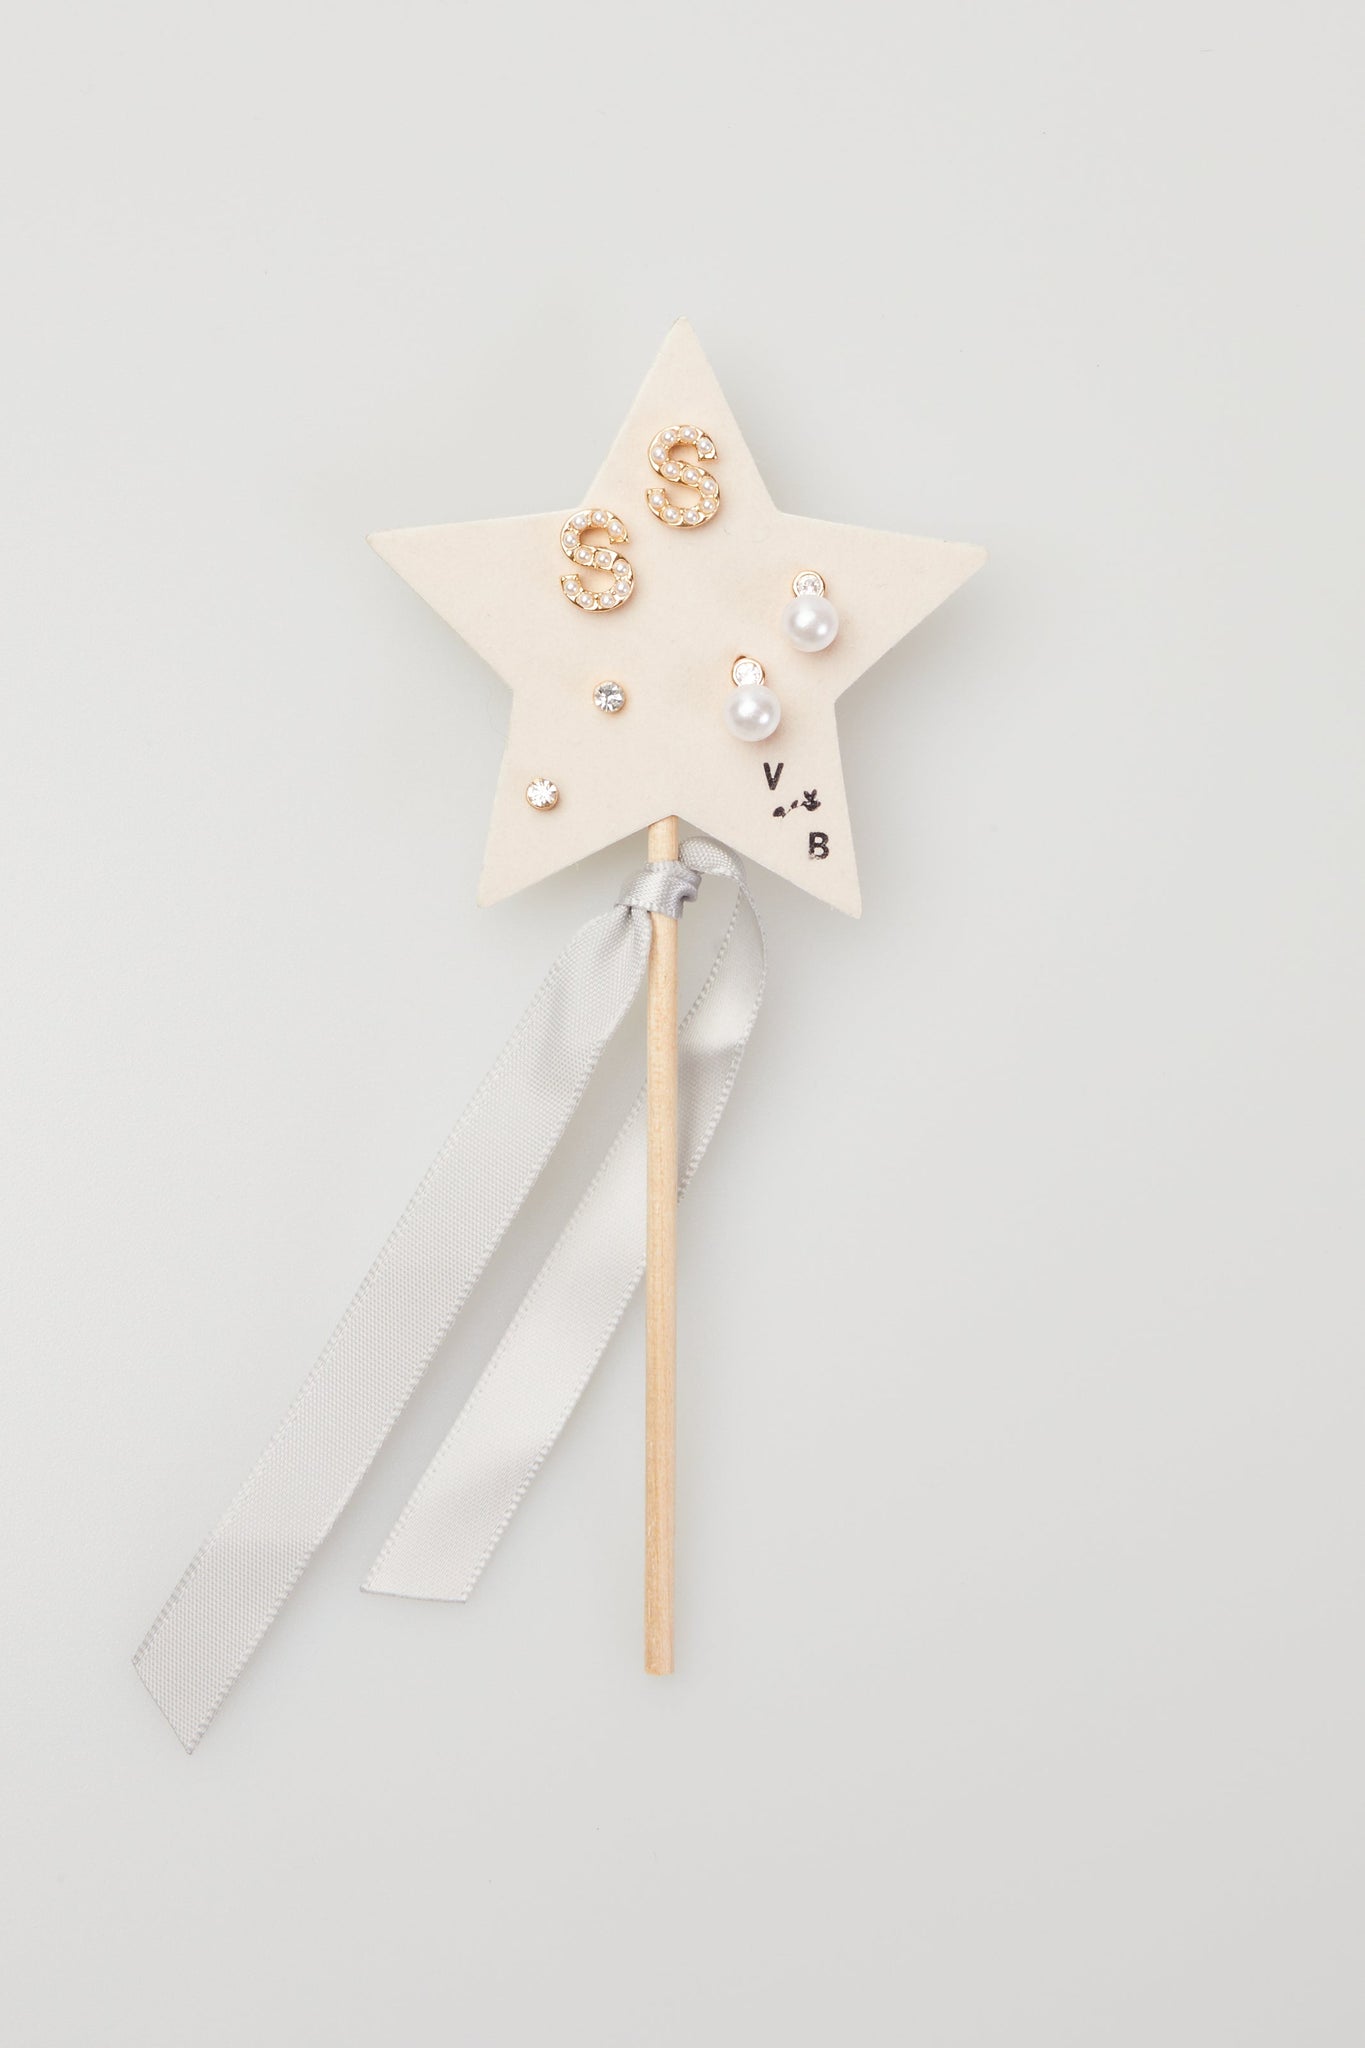 Wish Upon a Star Initial Gifting Trio